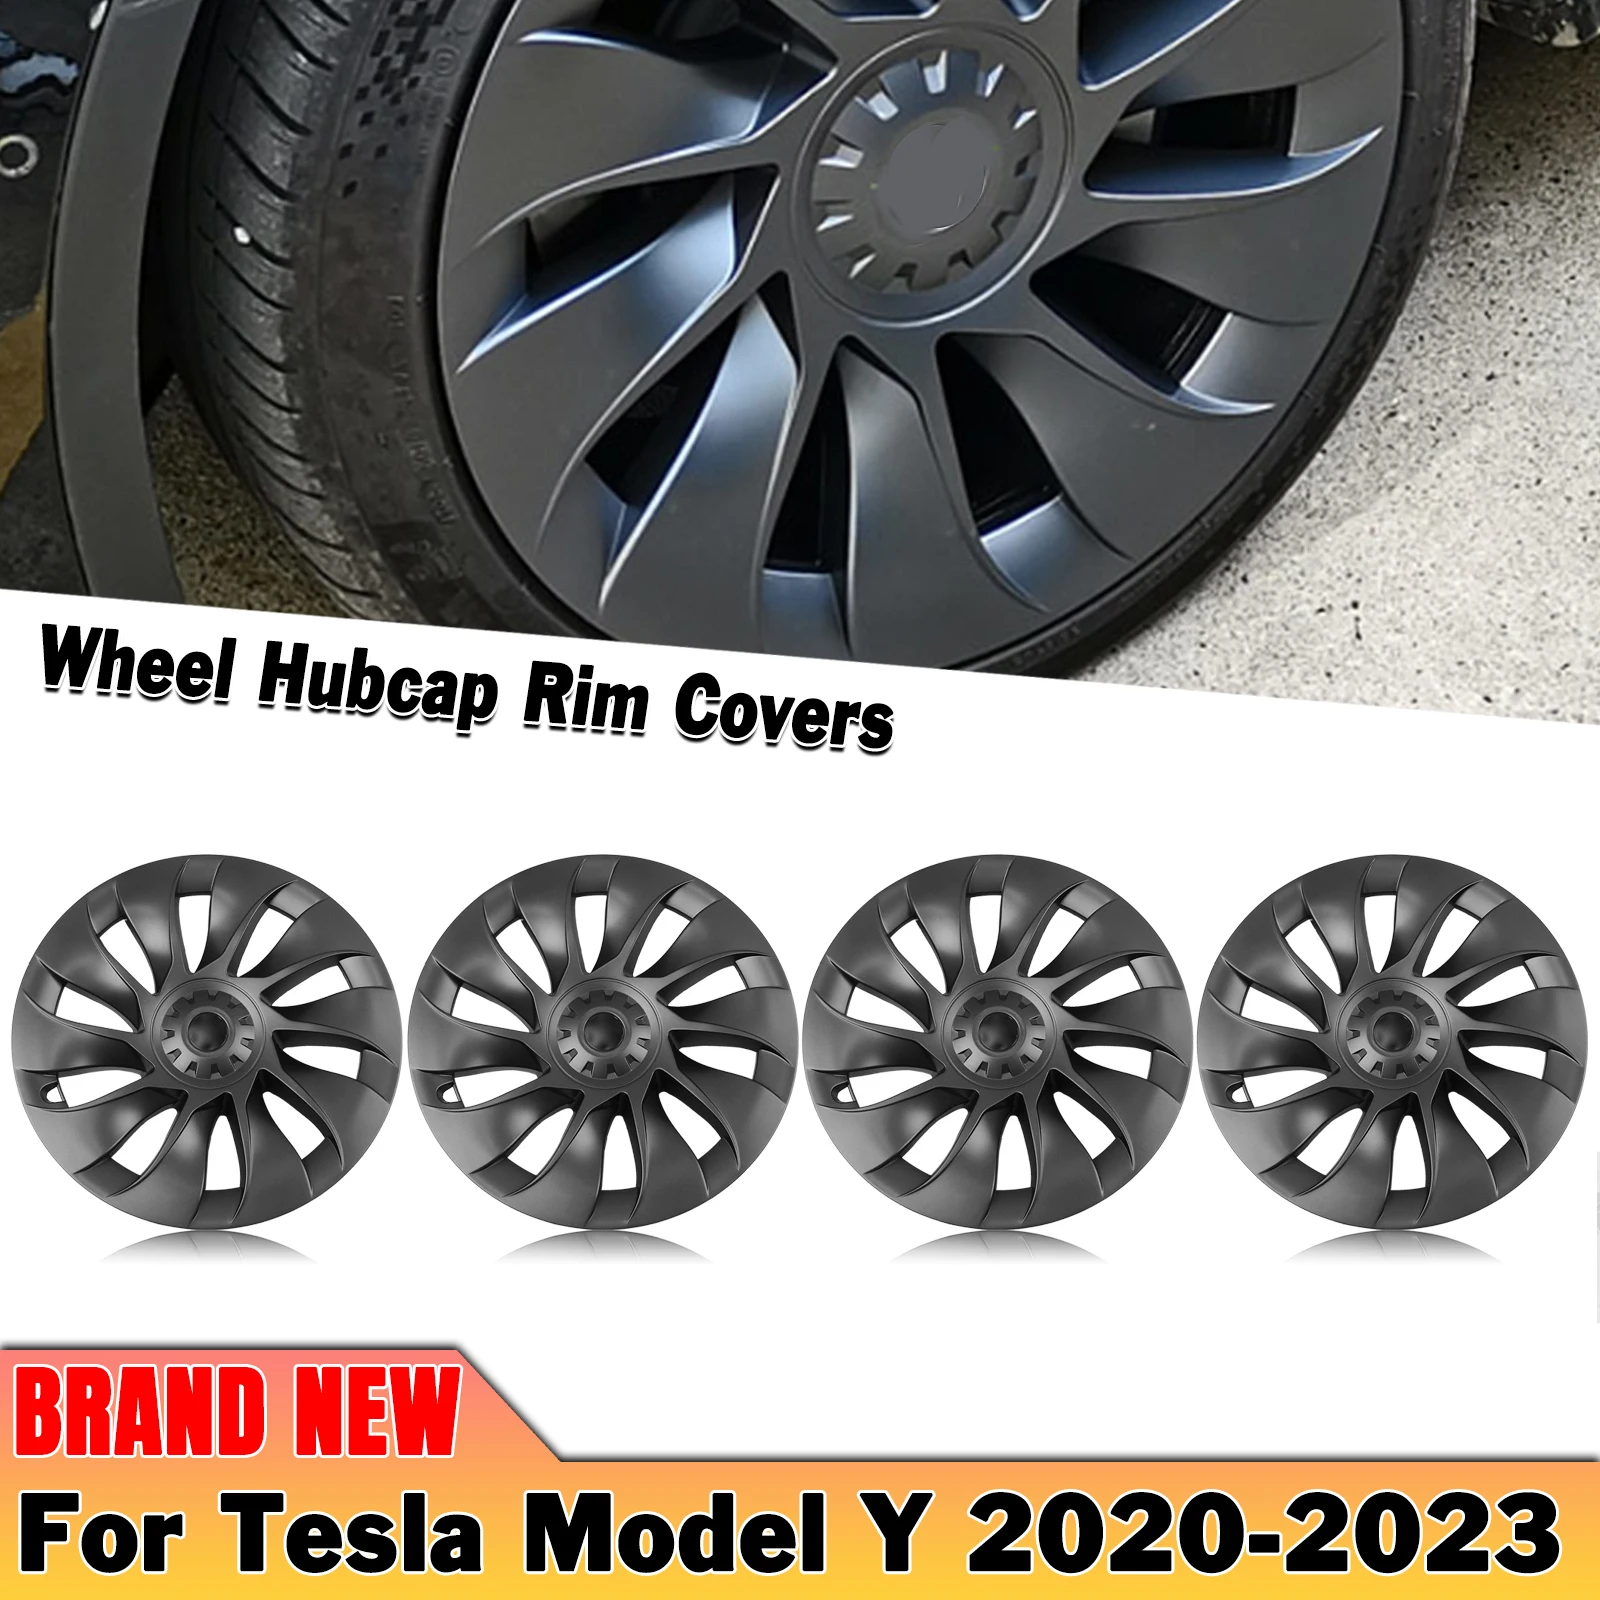 

4pcs/set 20" Wheel Cover Hubcaps Rim Cover Whirlwind Style Gray 20 Inch Exterior Hub Caps For Tesla Model Y 2020 2021 2022-2024